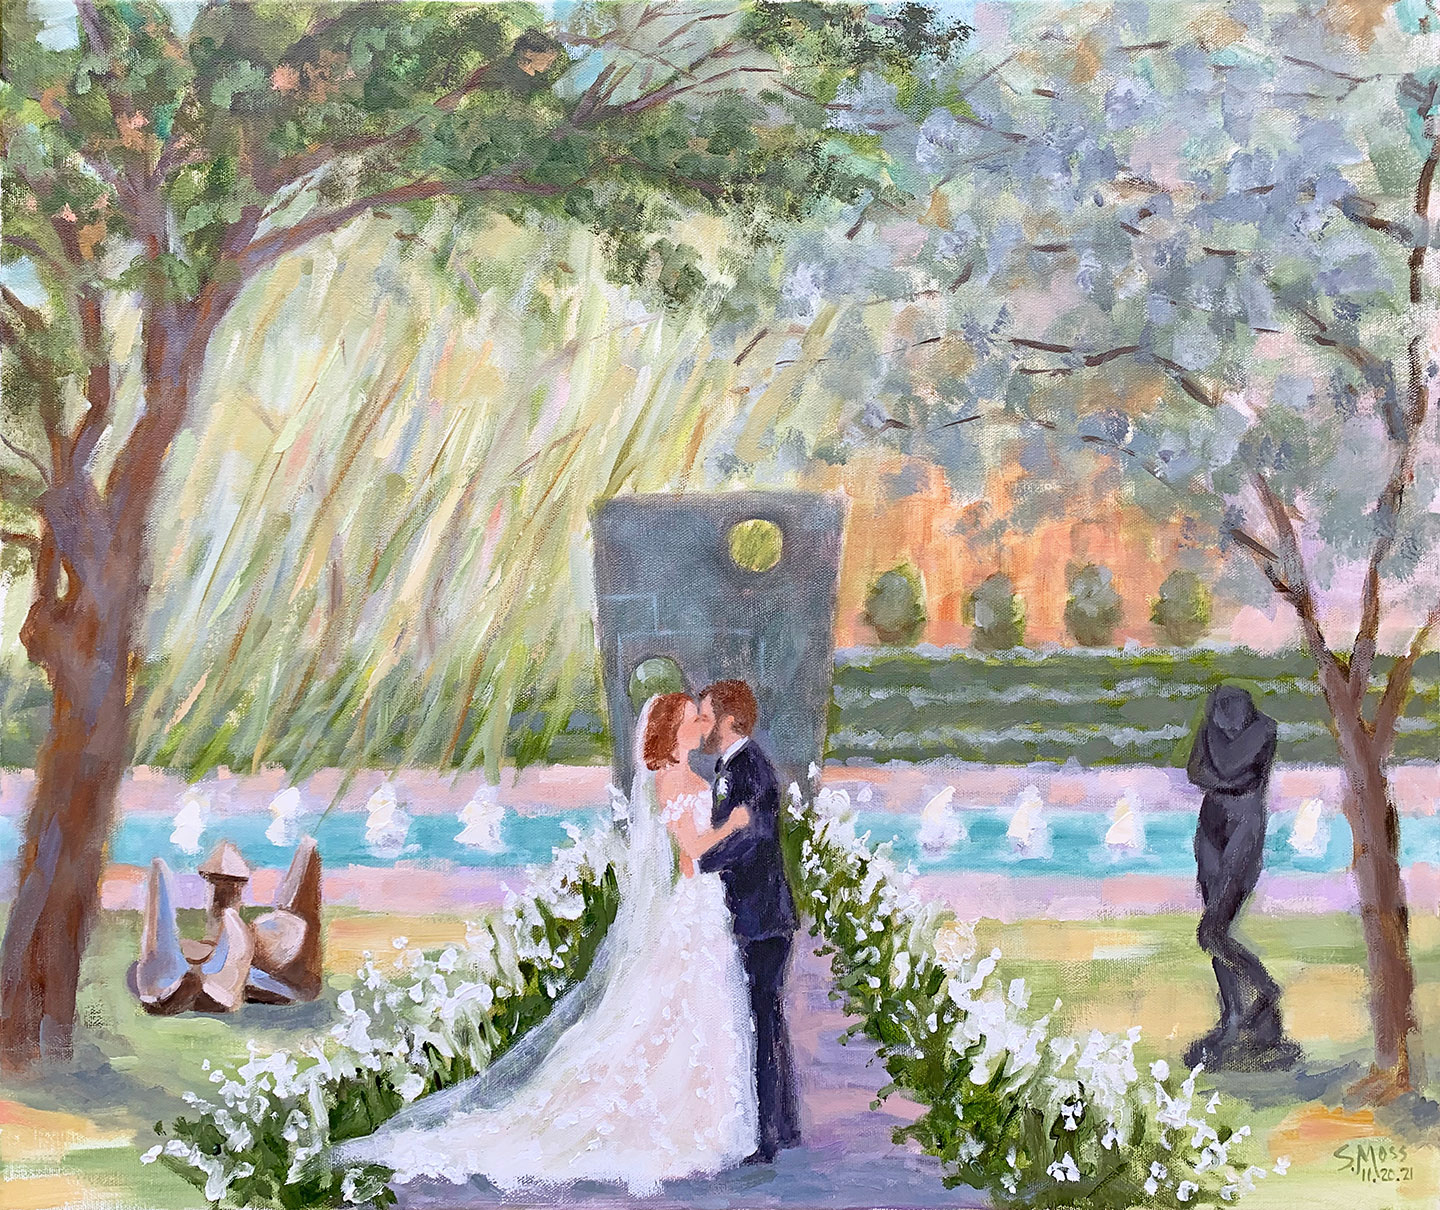 Wedding Ceremony Painting by Dallas artist Susan Moss Cooper at the Nasher Sculpture Center